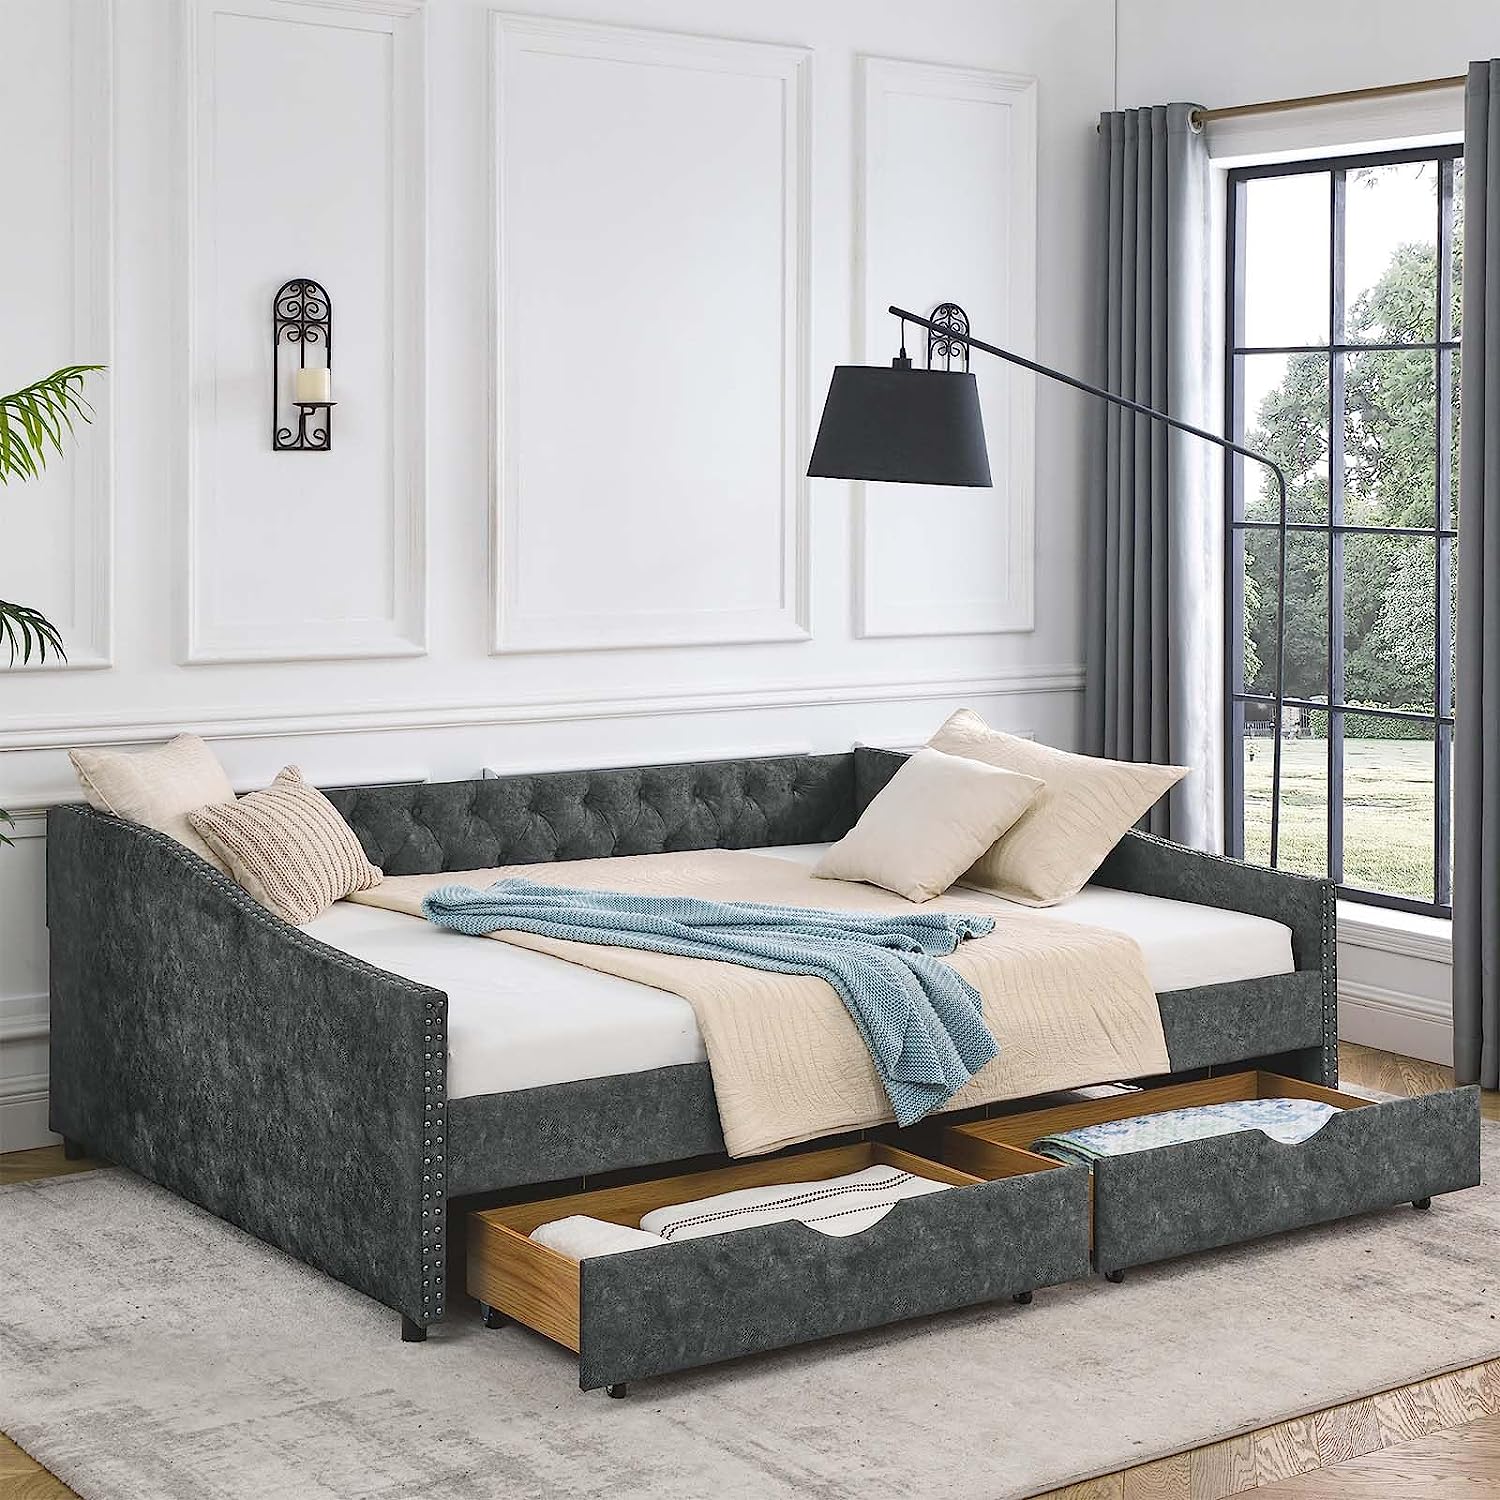 Daybed with Drawers, Modern Velvet Upholstered Queen [...]